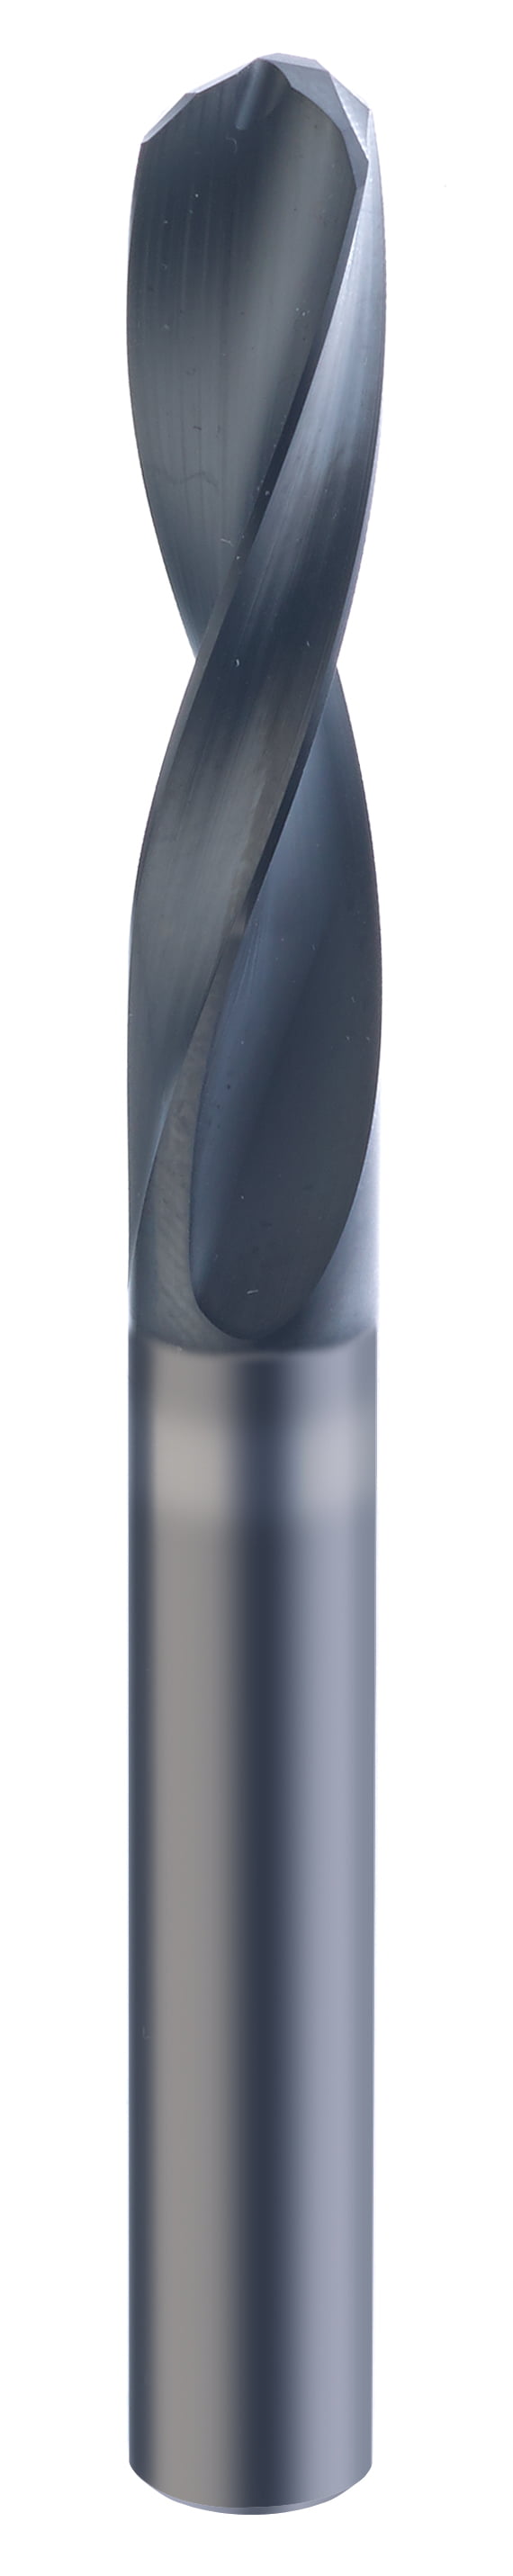 2.70mm Dia, 145 Degree Point, Solid Carbide Drill - 50001